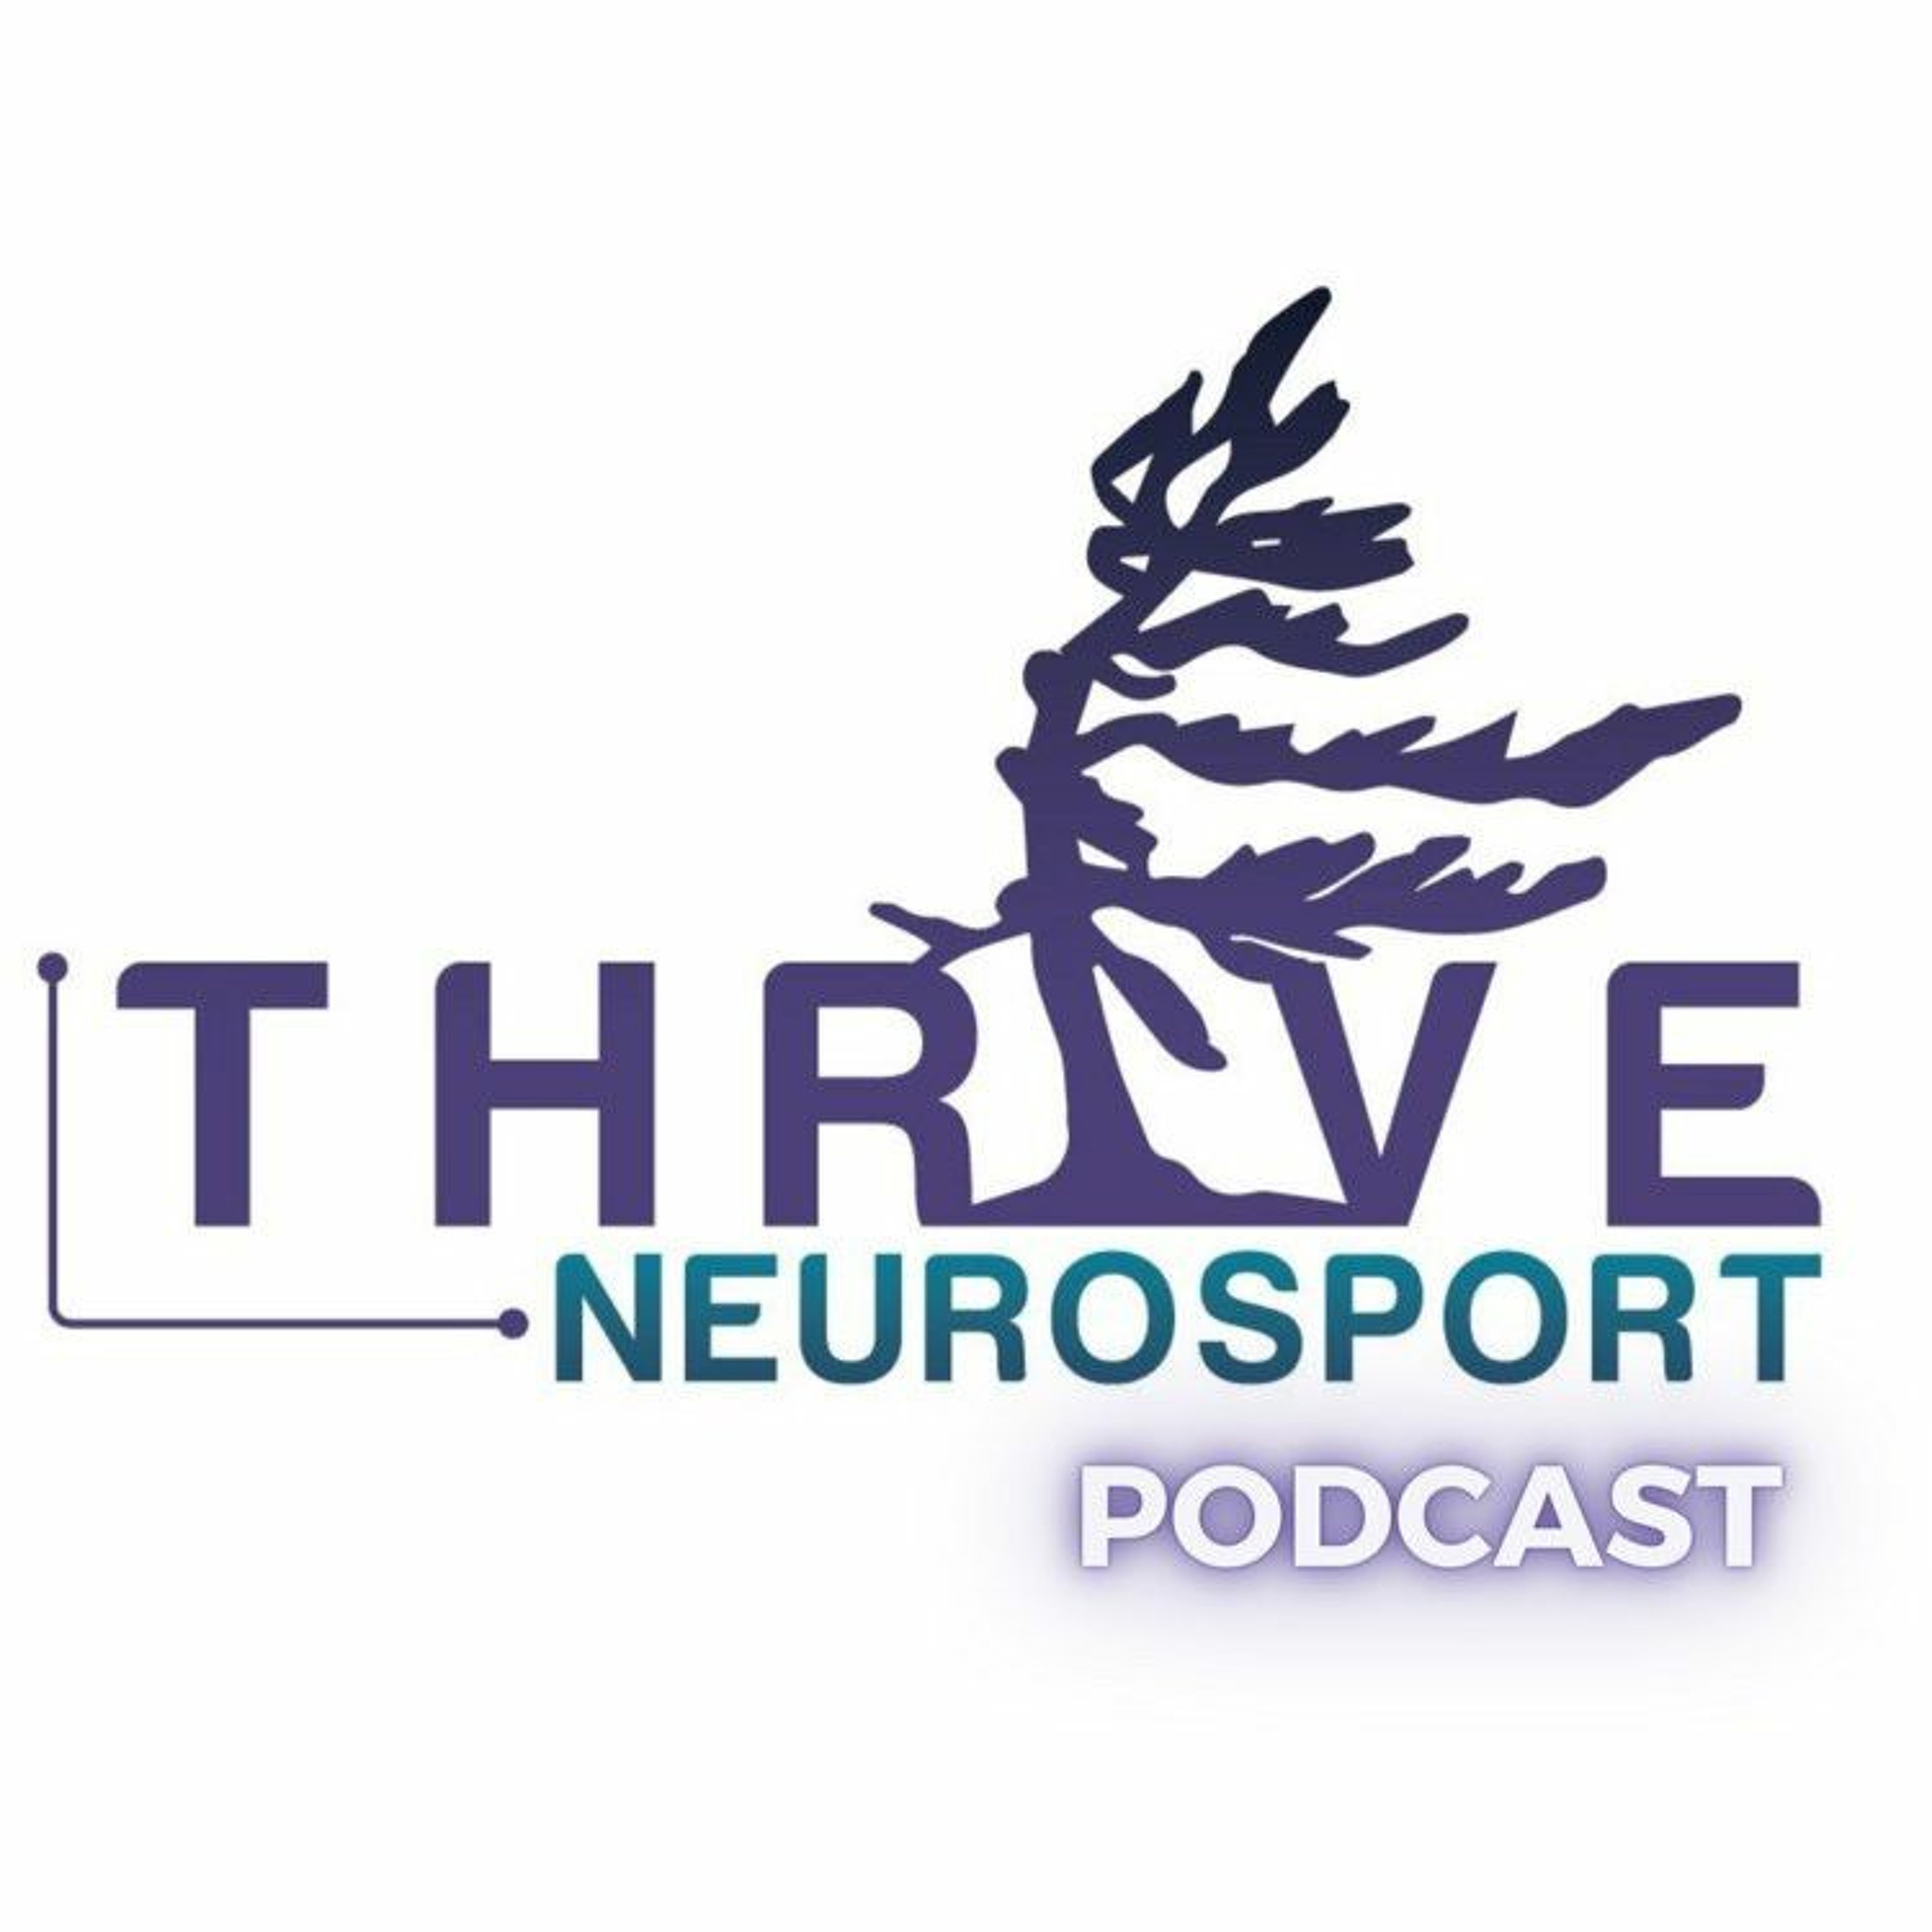 Thrive NeuroSport Podcast - Episode 1 - Cognitive-motor integration, concussion recovery & education Image